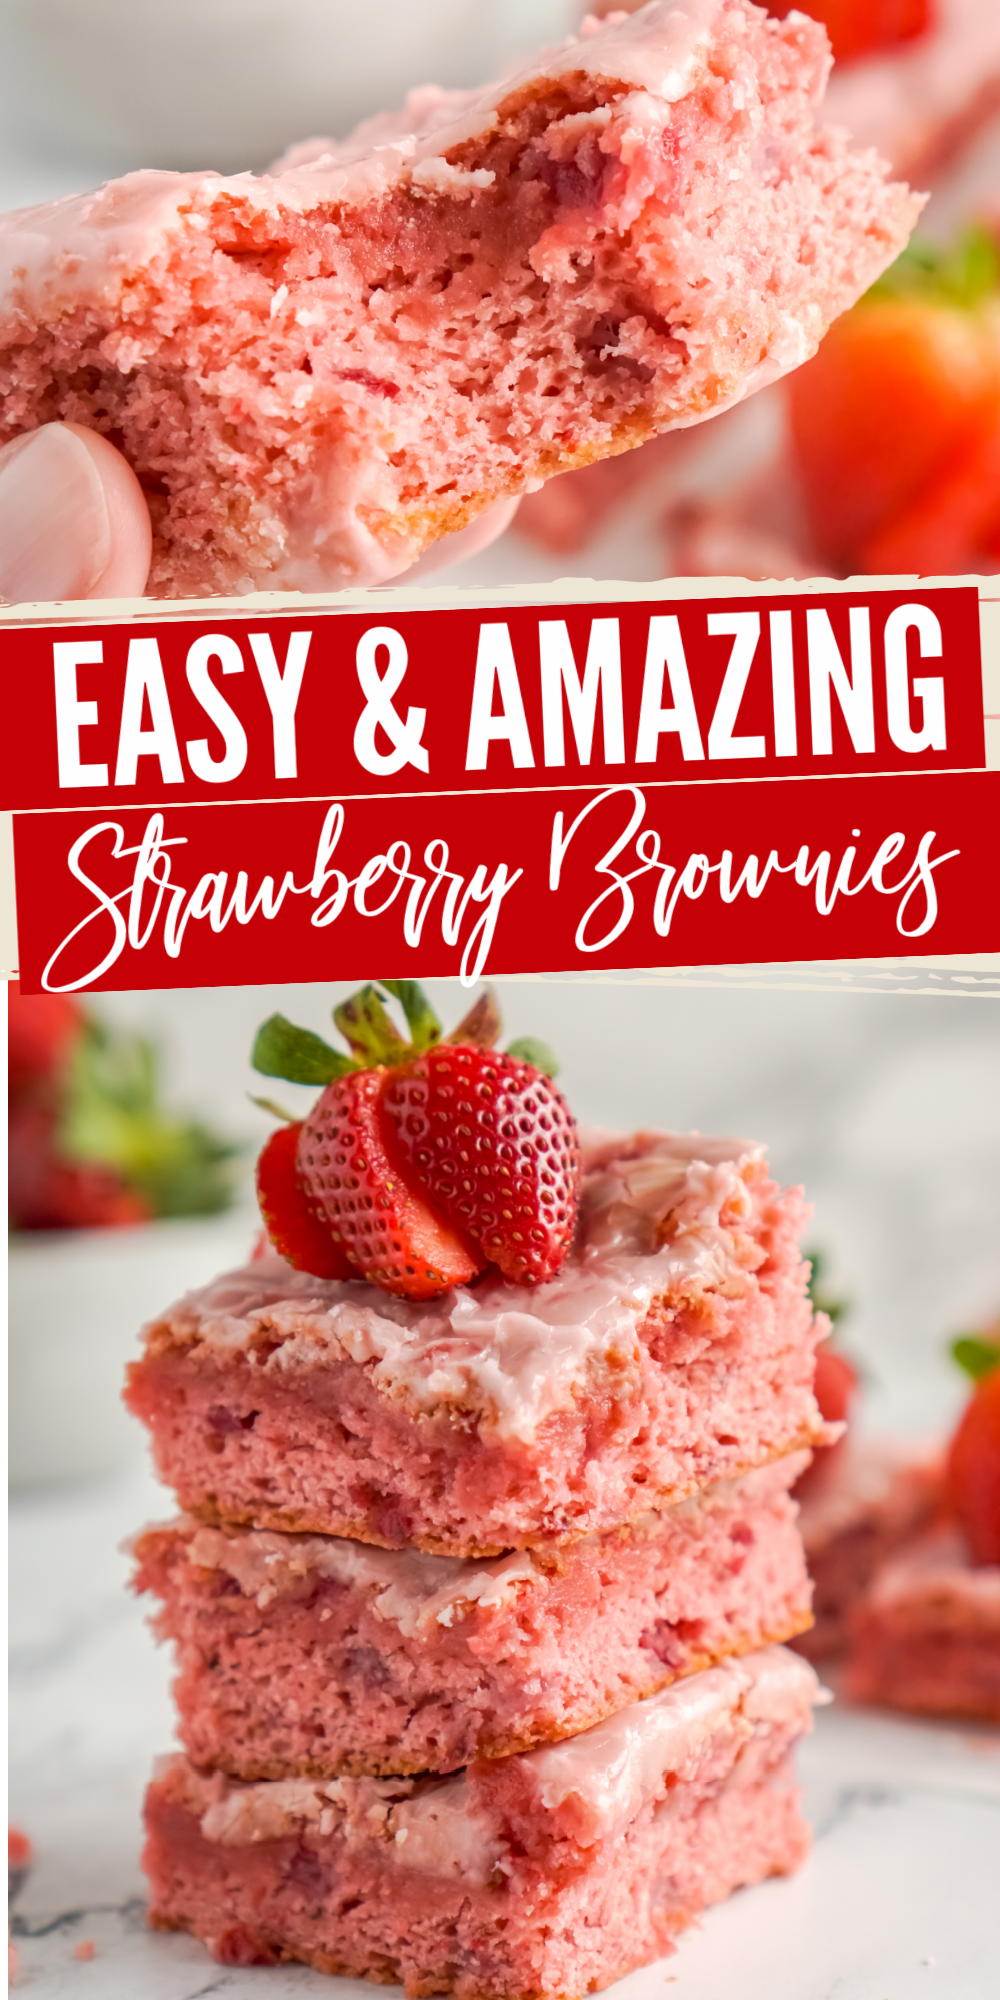 Easy Homemade Strawberry Brownies